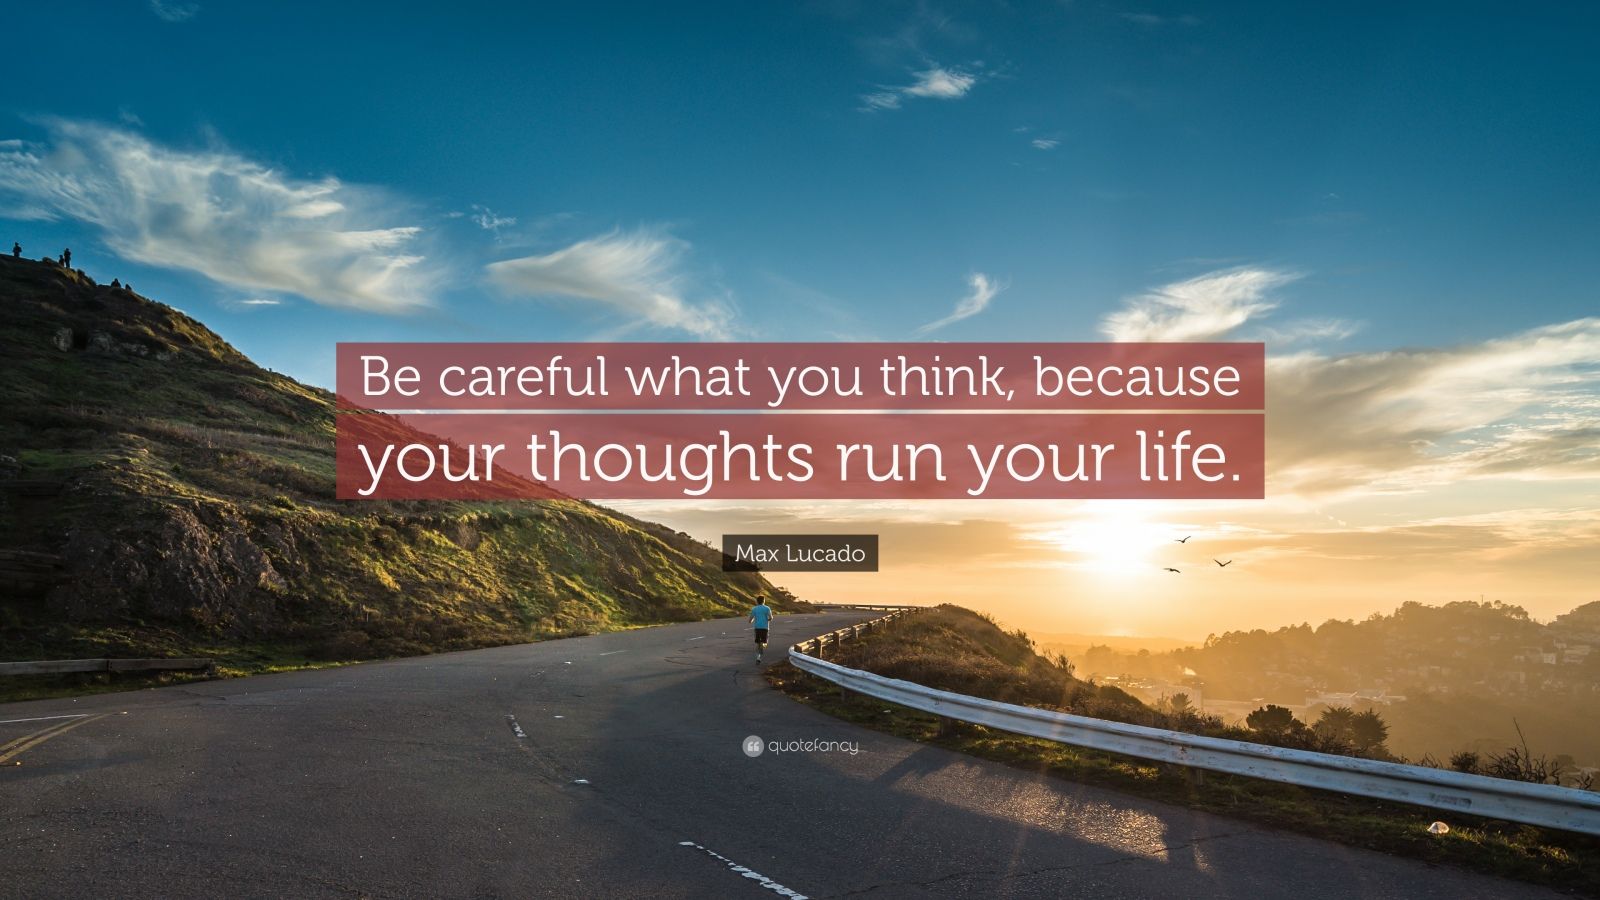 Max Lucado Quote “be Careful What You Think Because Your Thoughts Run Your Life” 3292